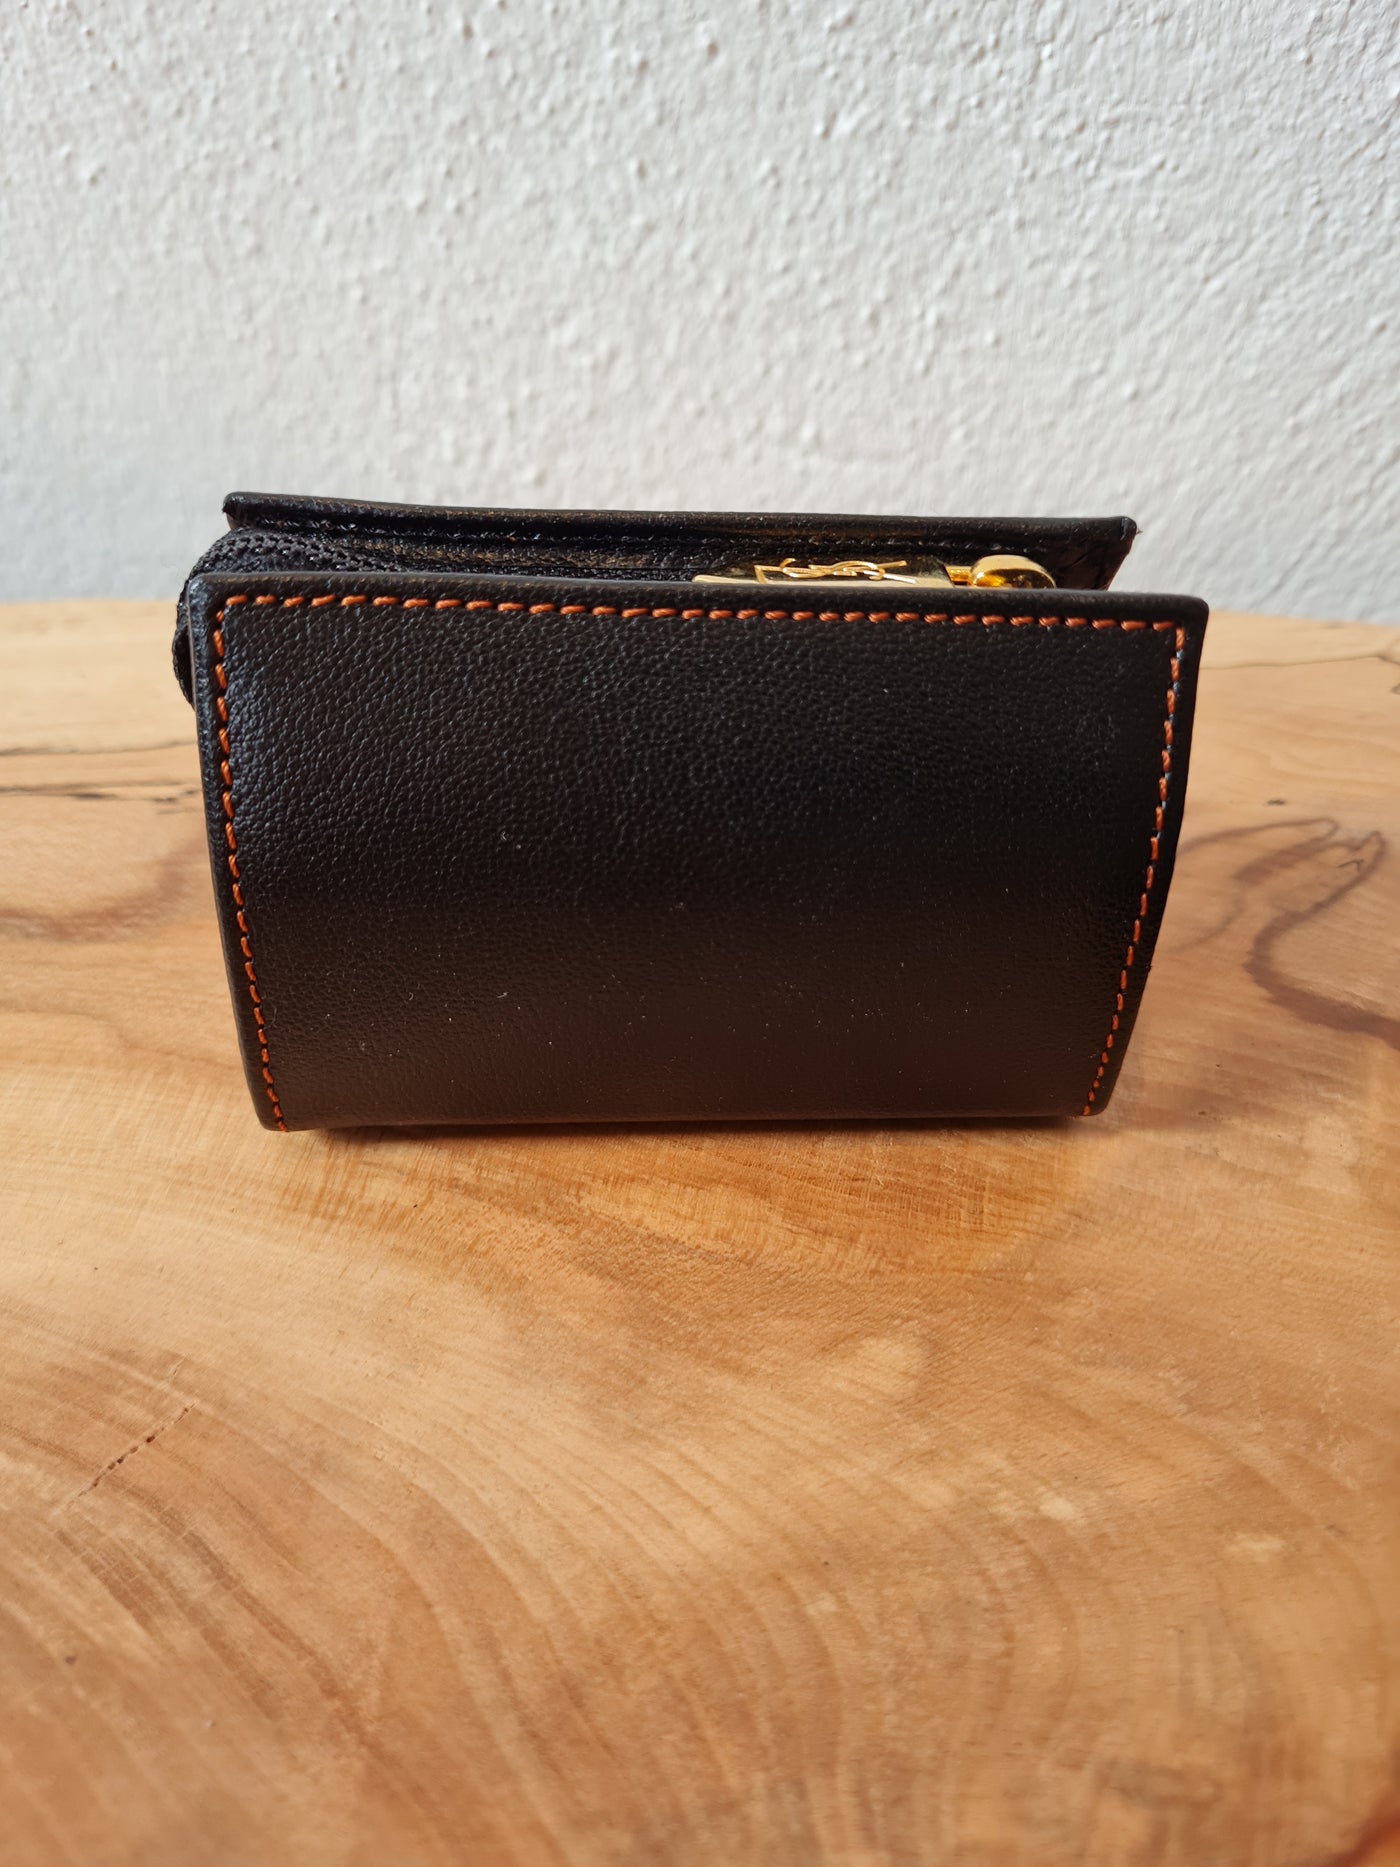 YSL Vintage 1980s Black coin Purse New